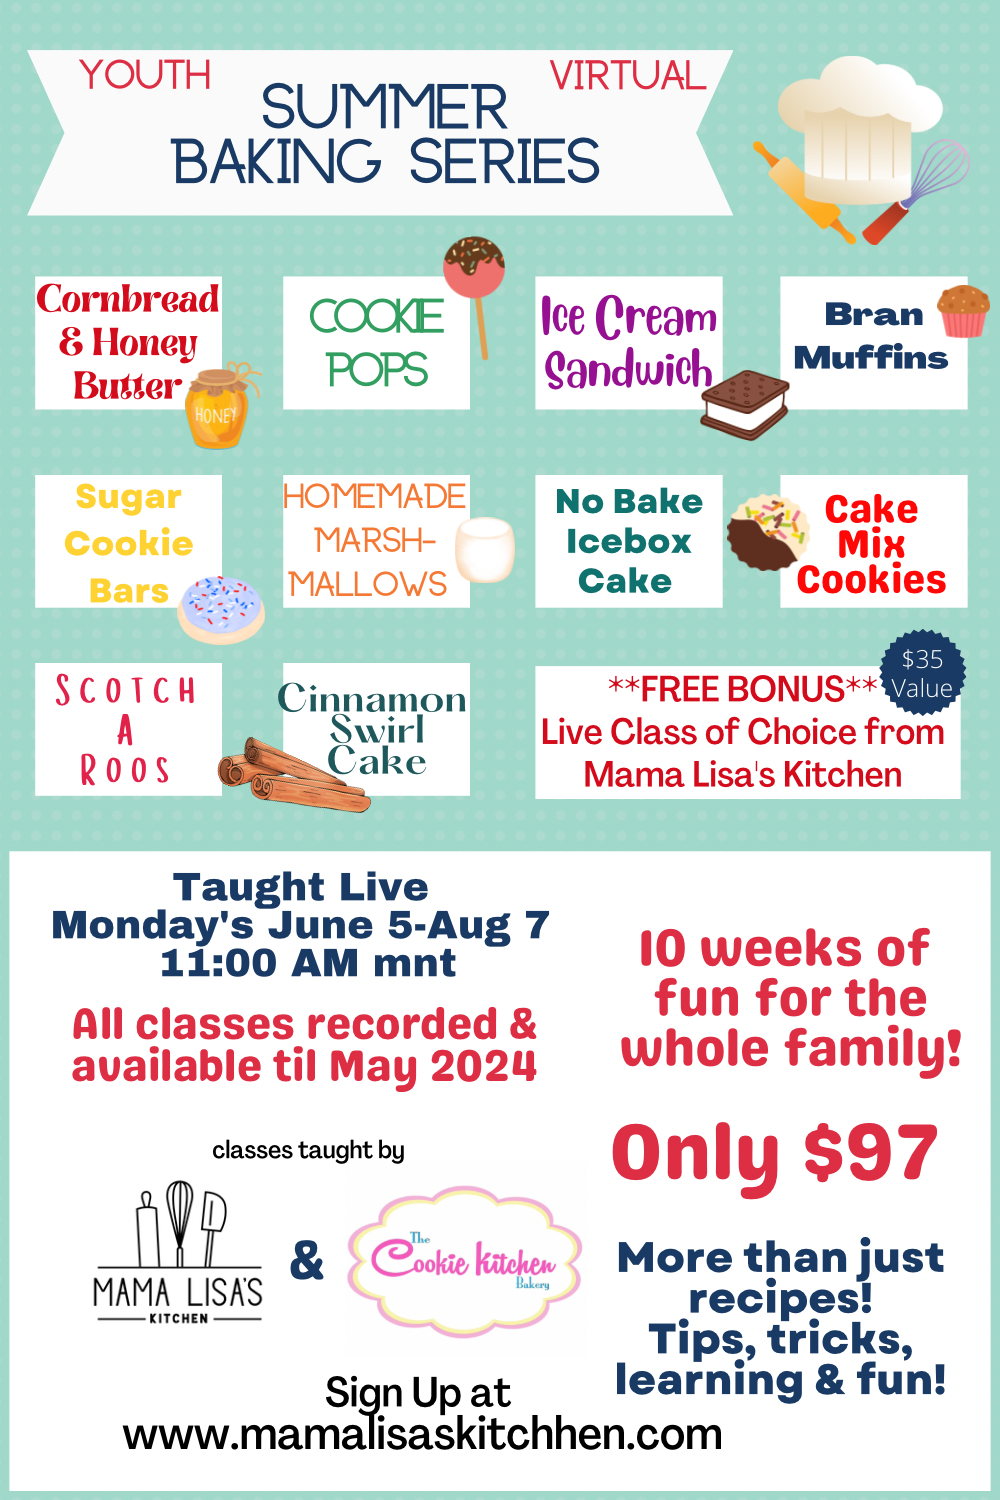 2023 Youth Summer Baking Series